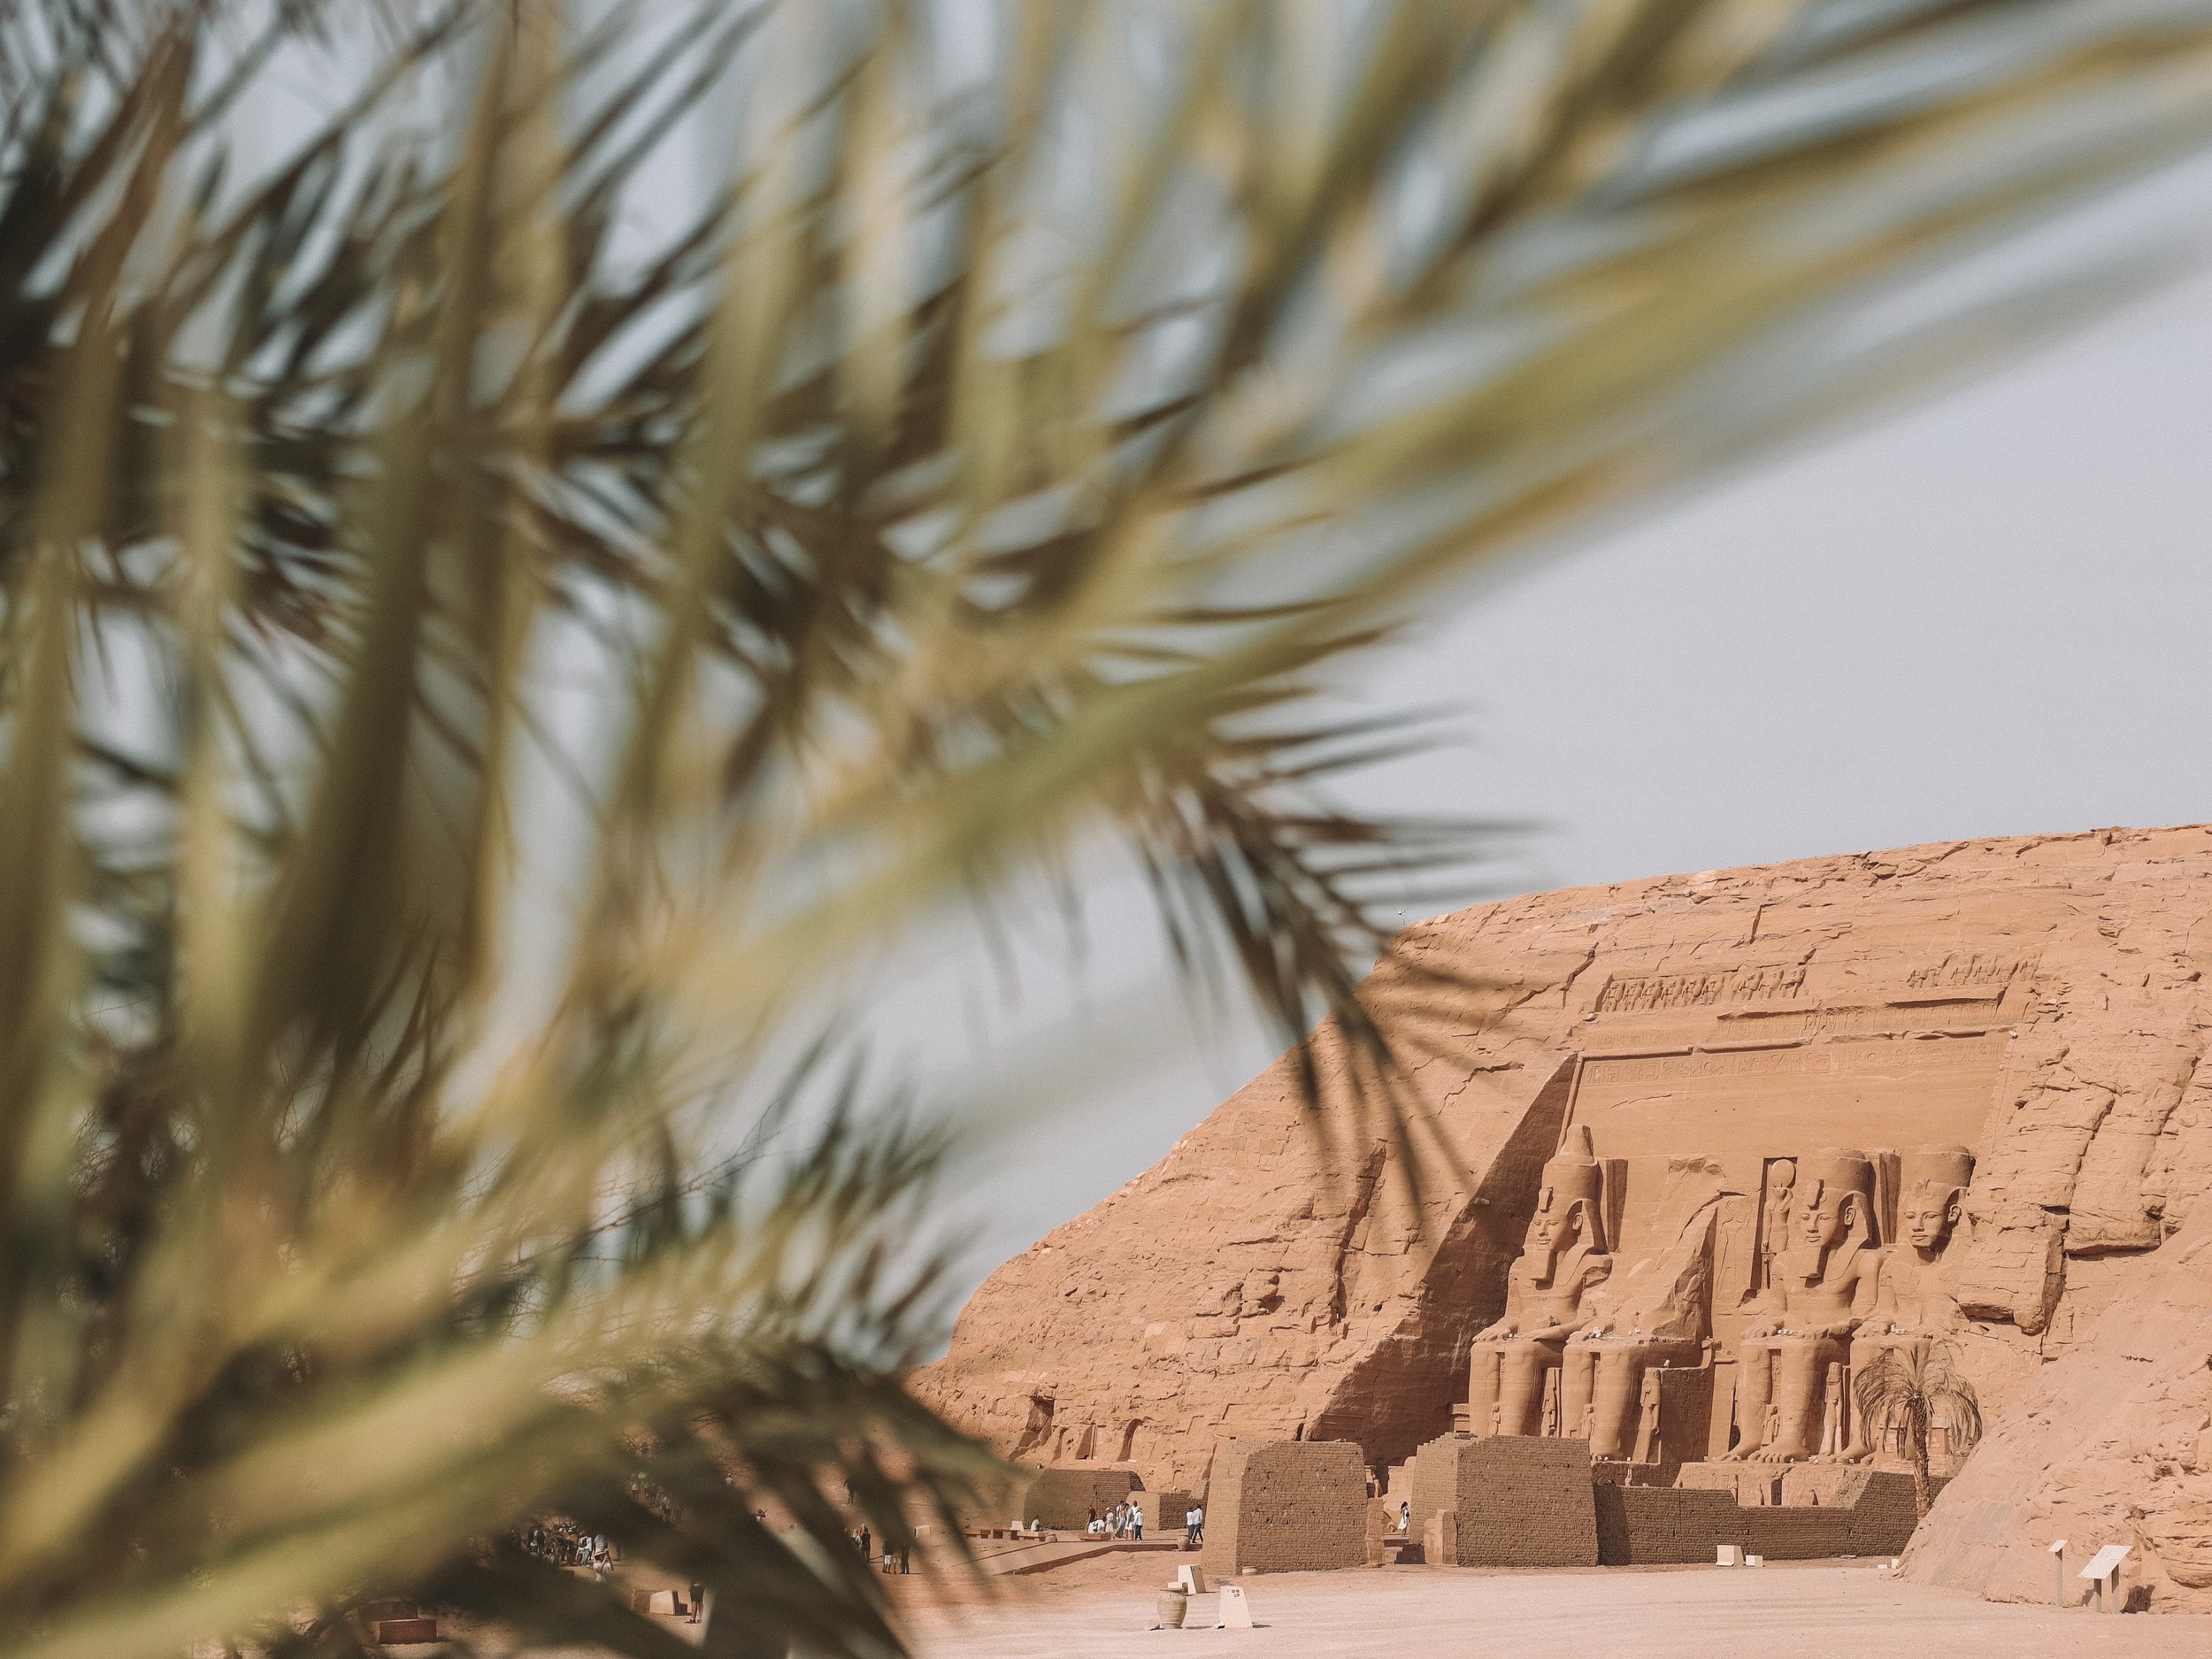 Main temple in the background with palm tree - Abu Simbel - Egypt